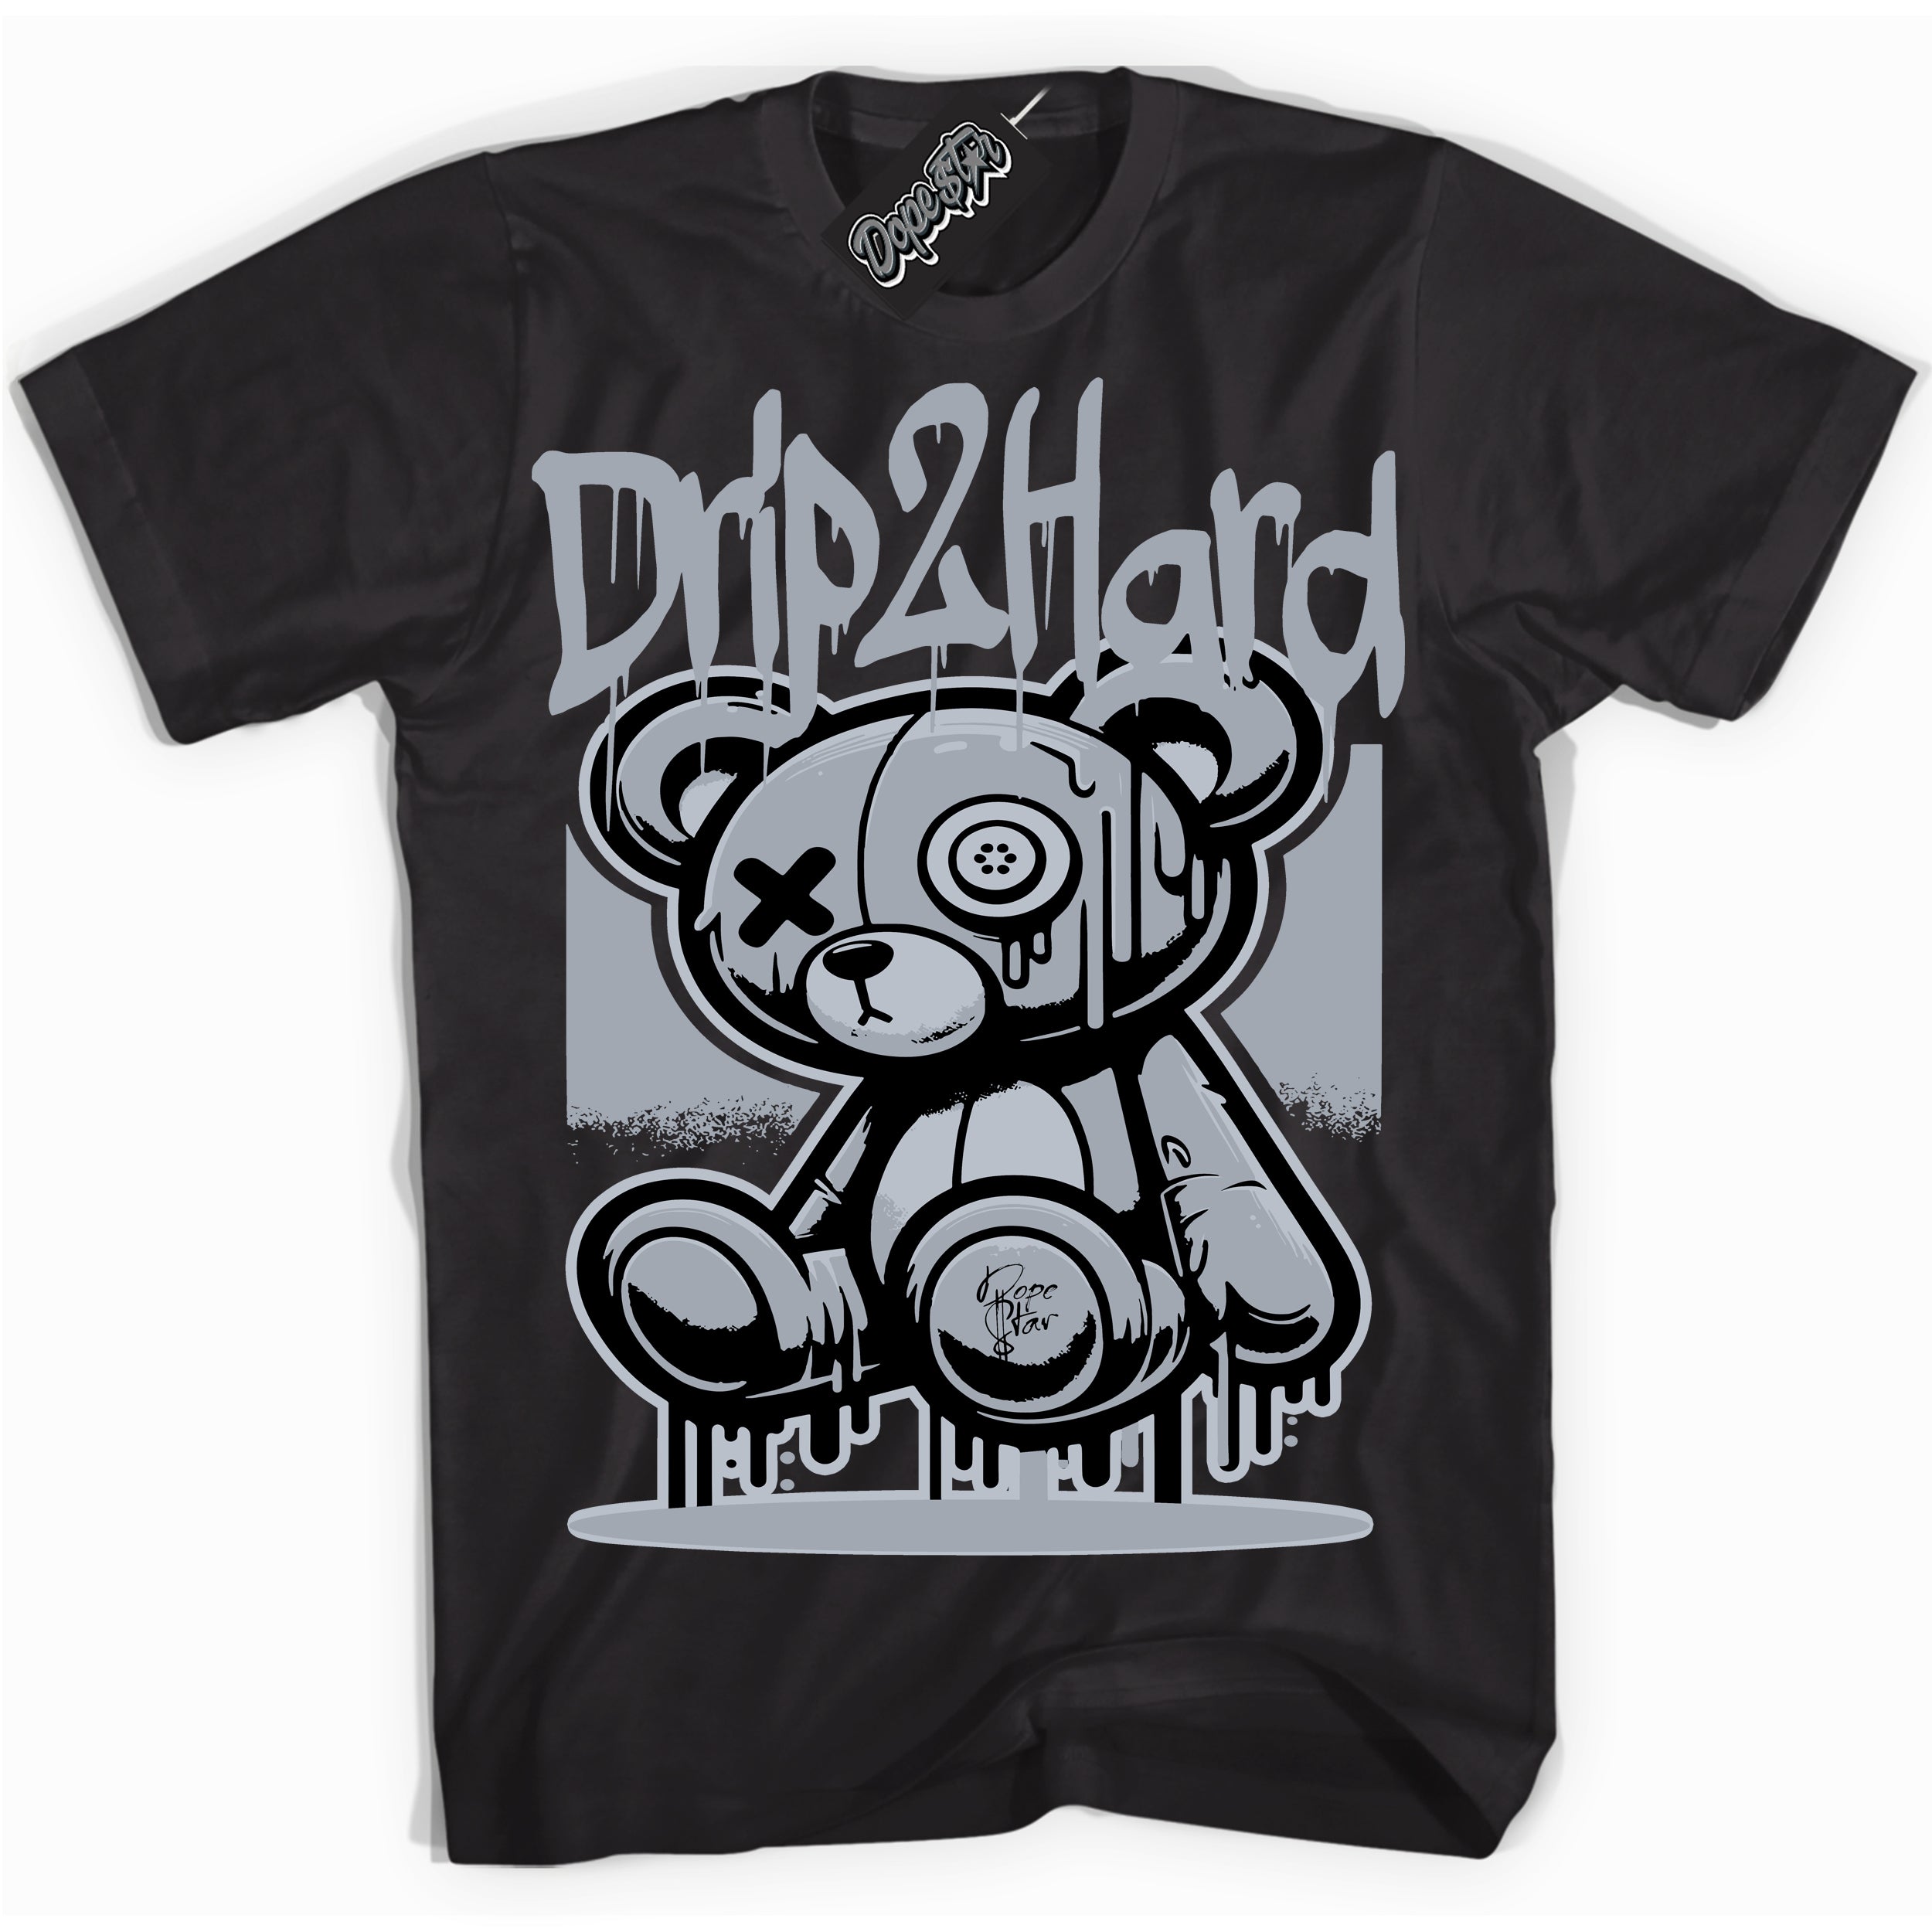 Cool Black graphic tee with “ Drip 2 Hard ” design, that perfectly matches Kaws X Sky High Farm 1s